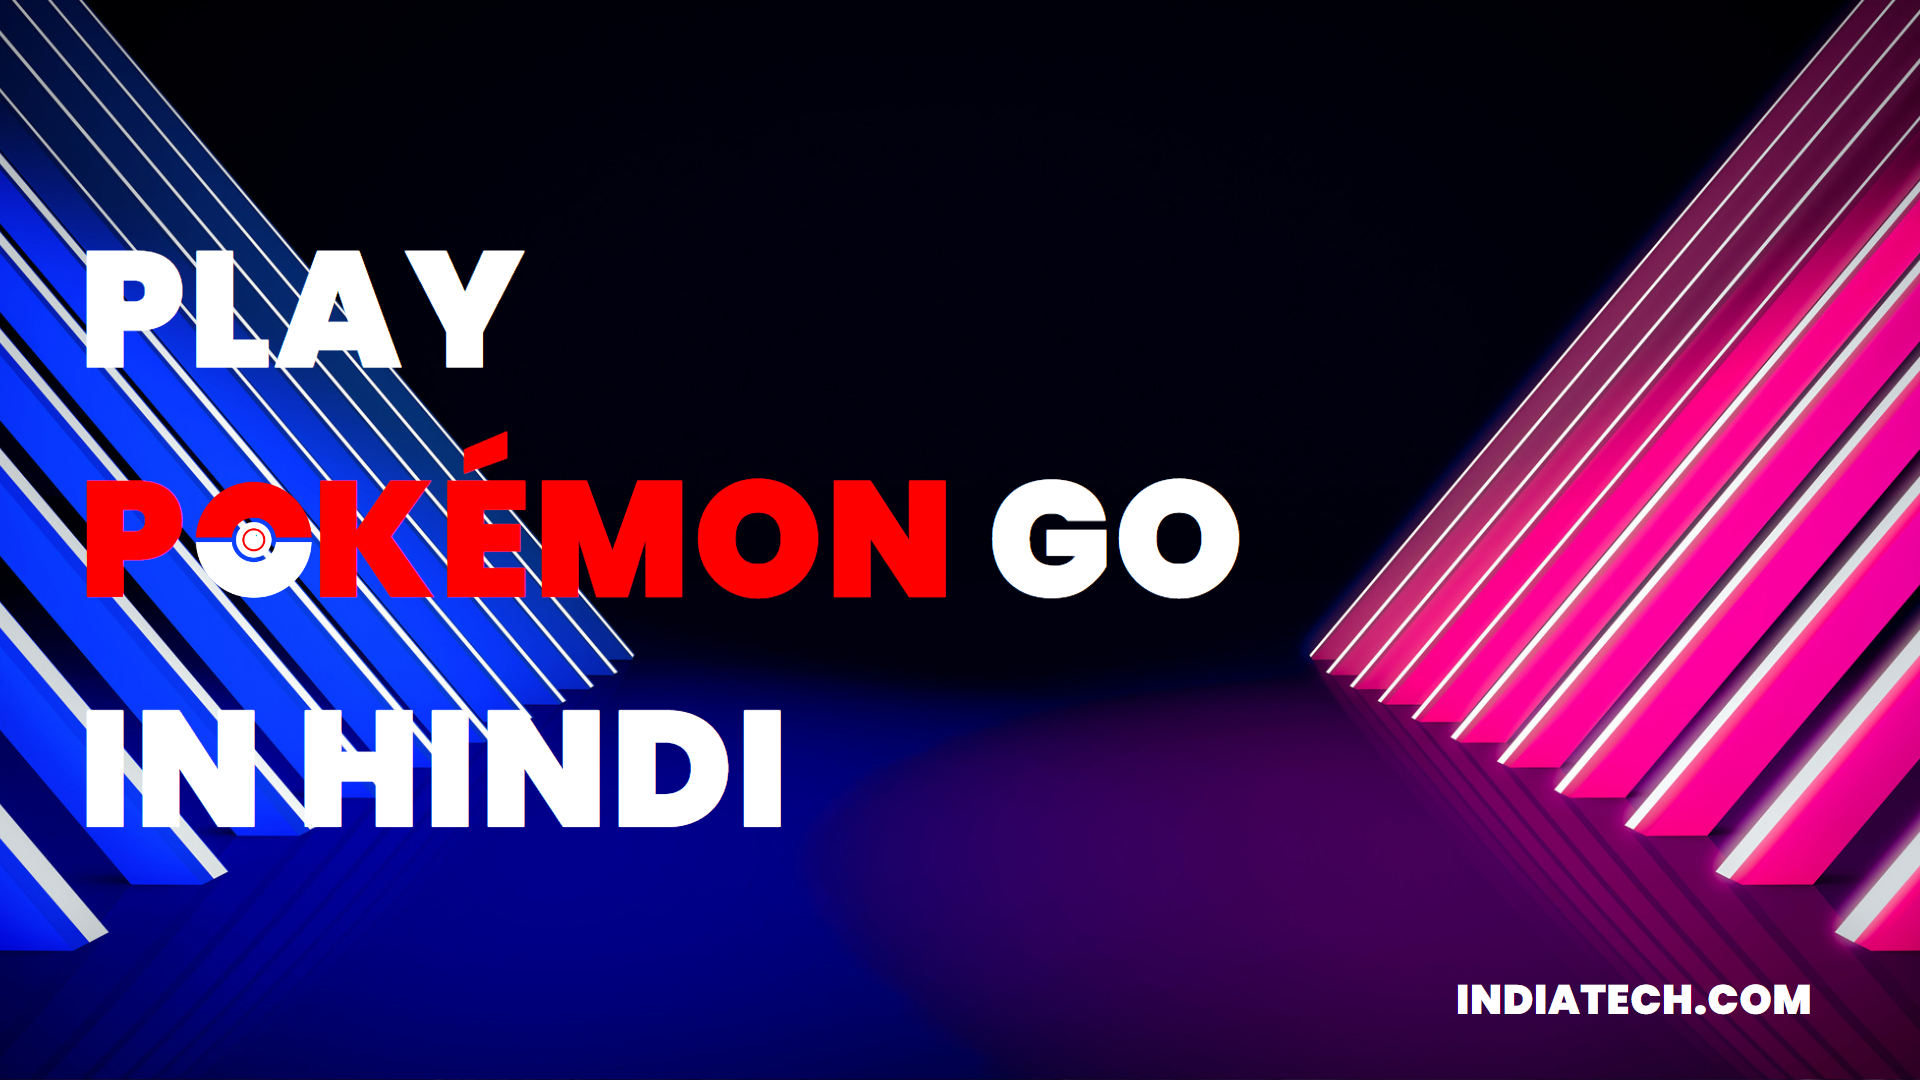 Niantic Expands in India: Play Pokémon Go in Hindi